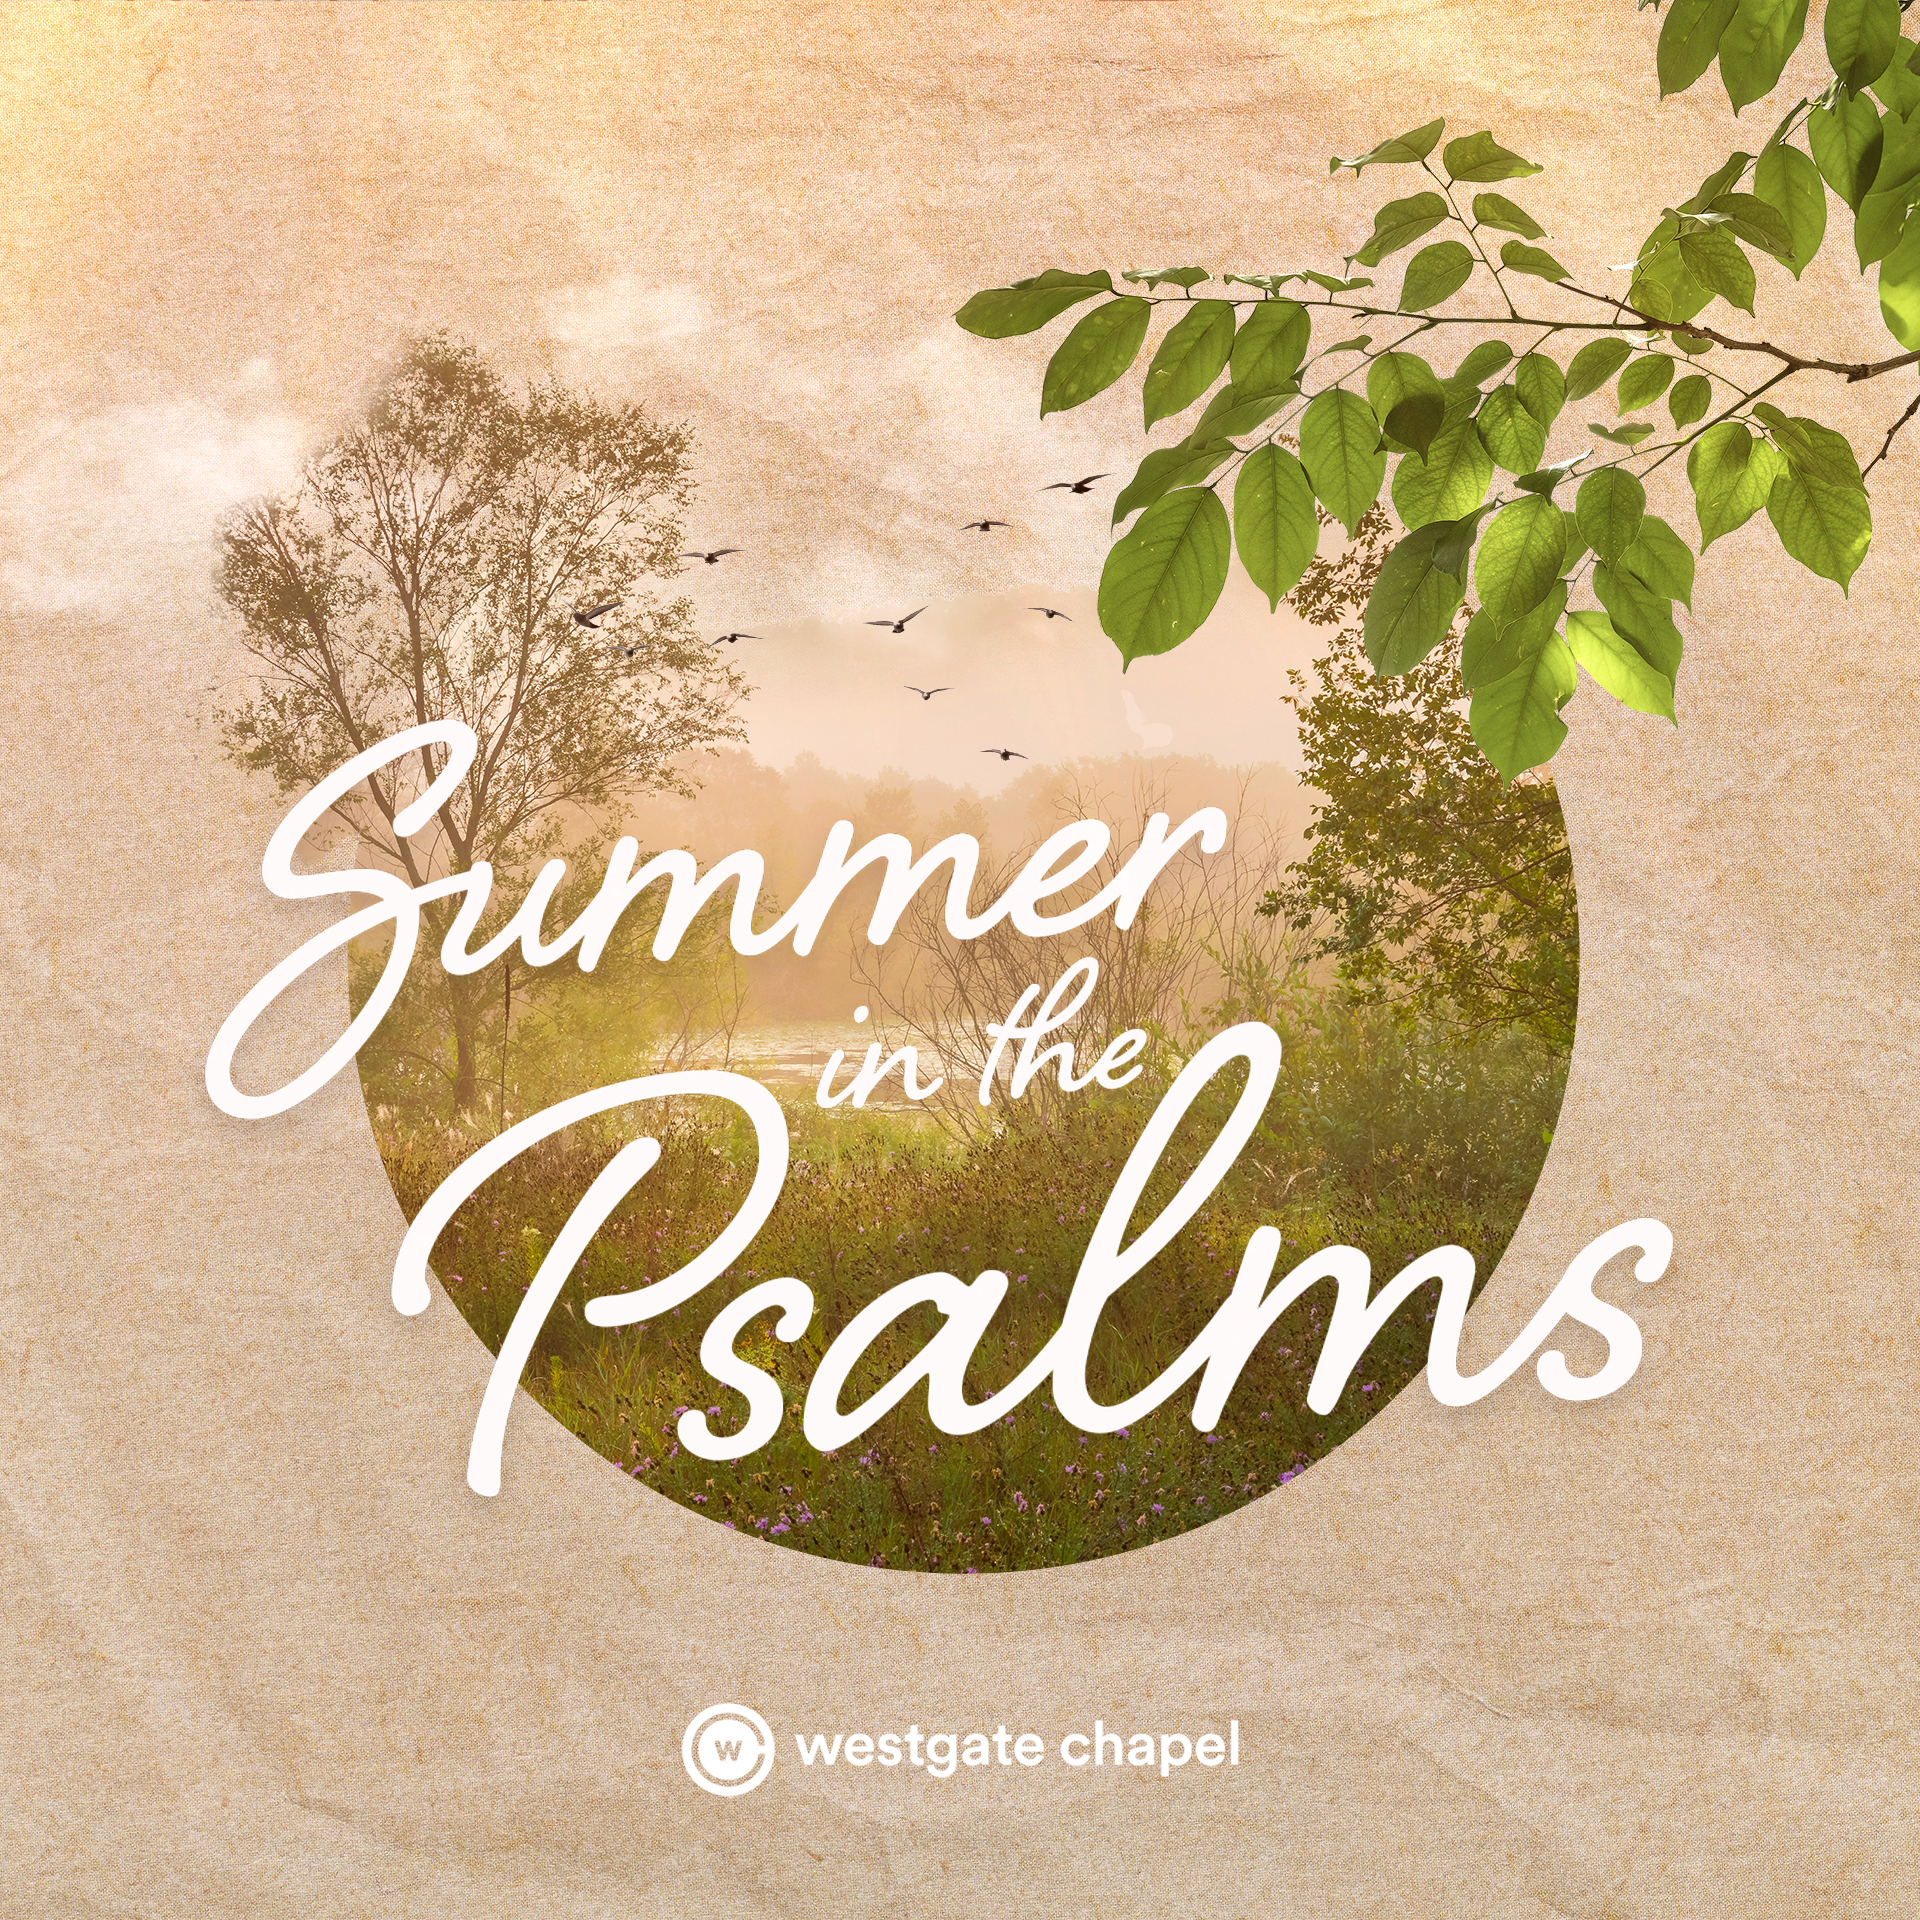 Summer in the Psalms: Psalm 8 - The Majesty of God in Creation